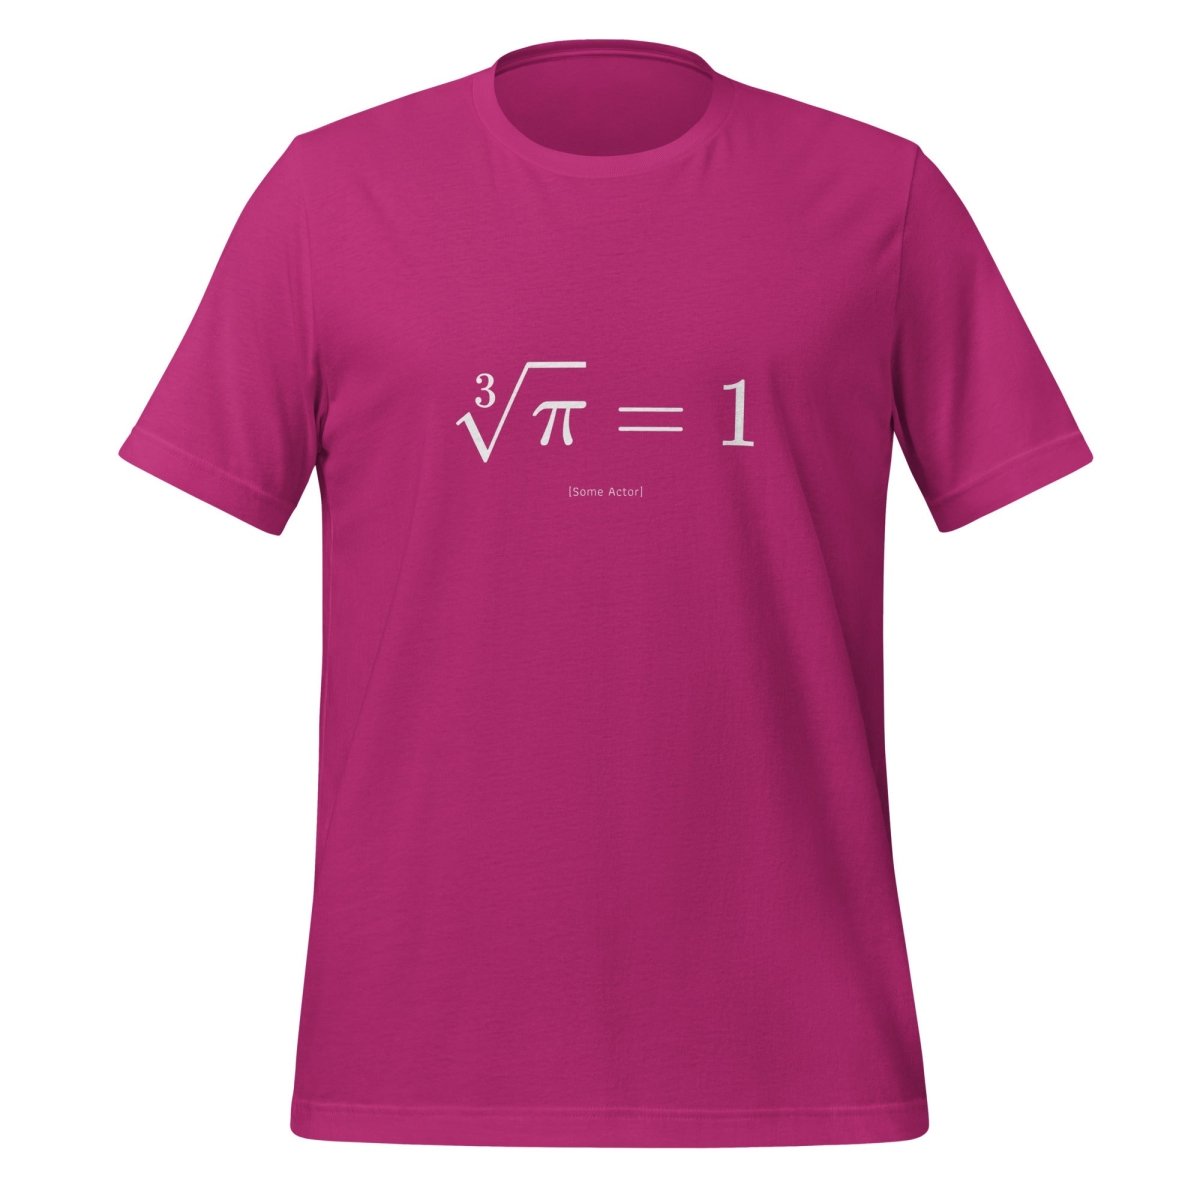 The Cube Root of Pi Equals 1 T - Shirt (unisex) - Berry - AI Store